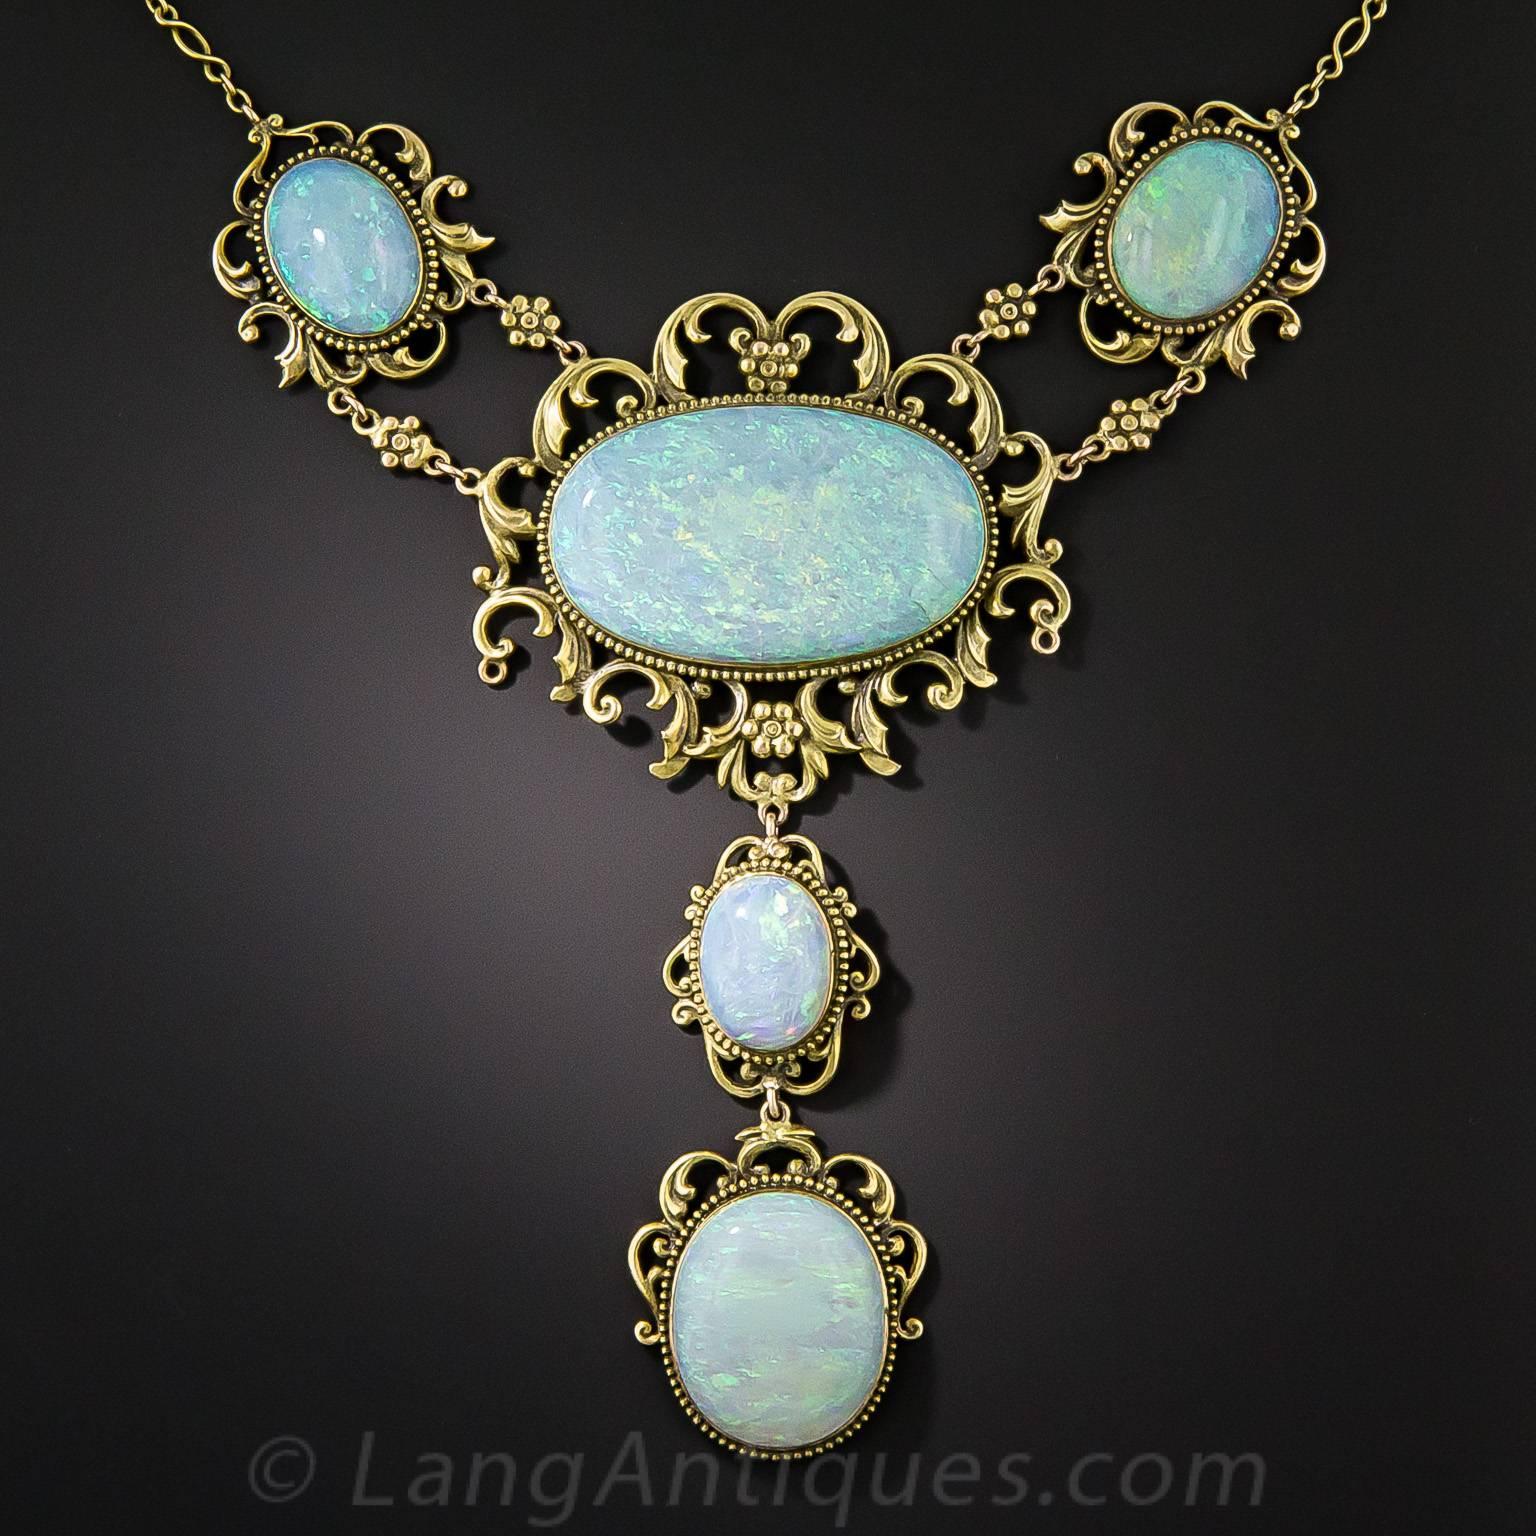 Five sizable multi-colored pastel opals (plus one more at the clasp), together weighing approximately 34 carats, are presented in regal fashion in this opulent and enchanting necklace dating from the-turn-of-the-last-century. The captivating